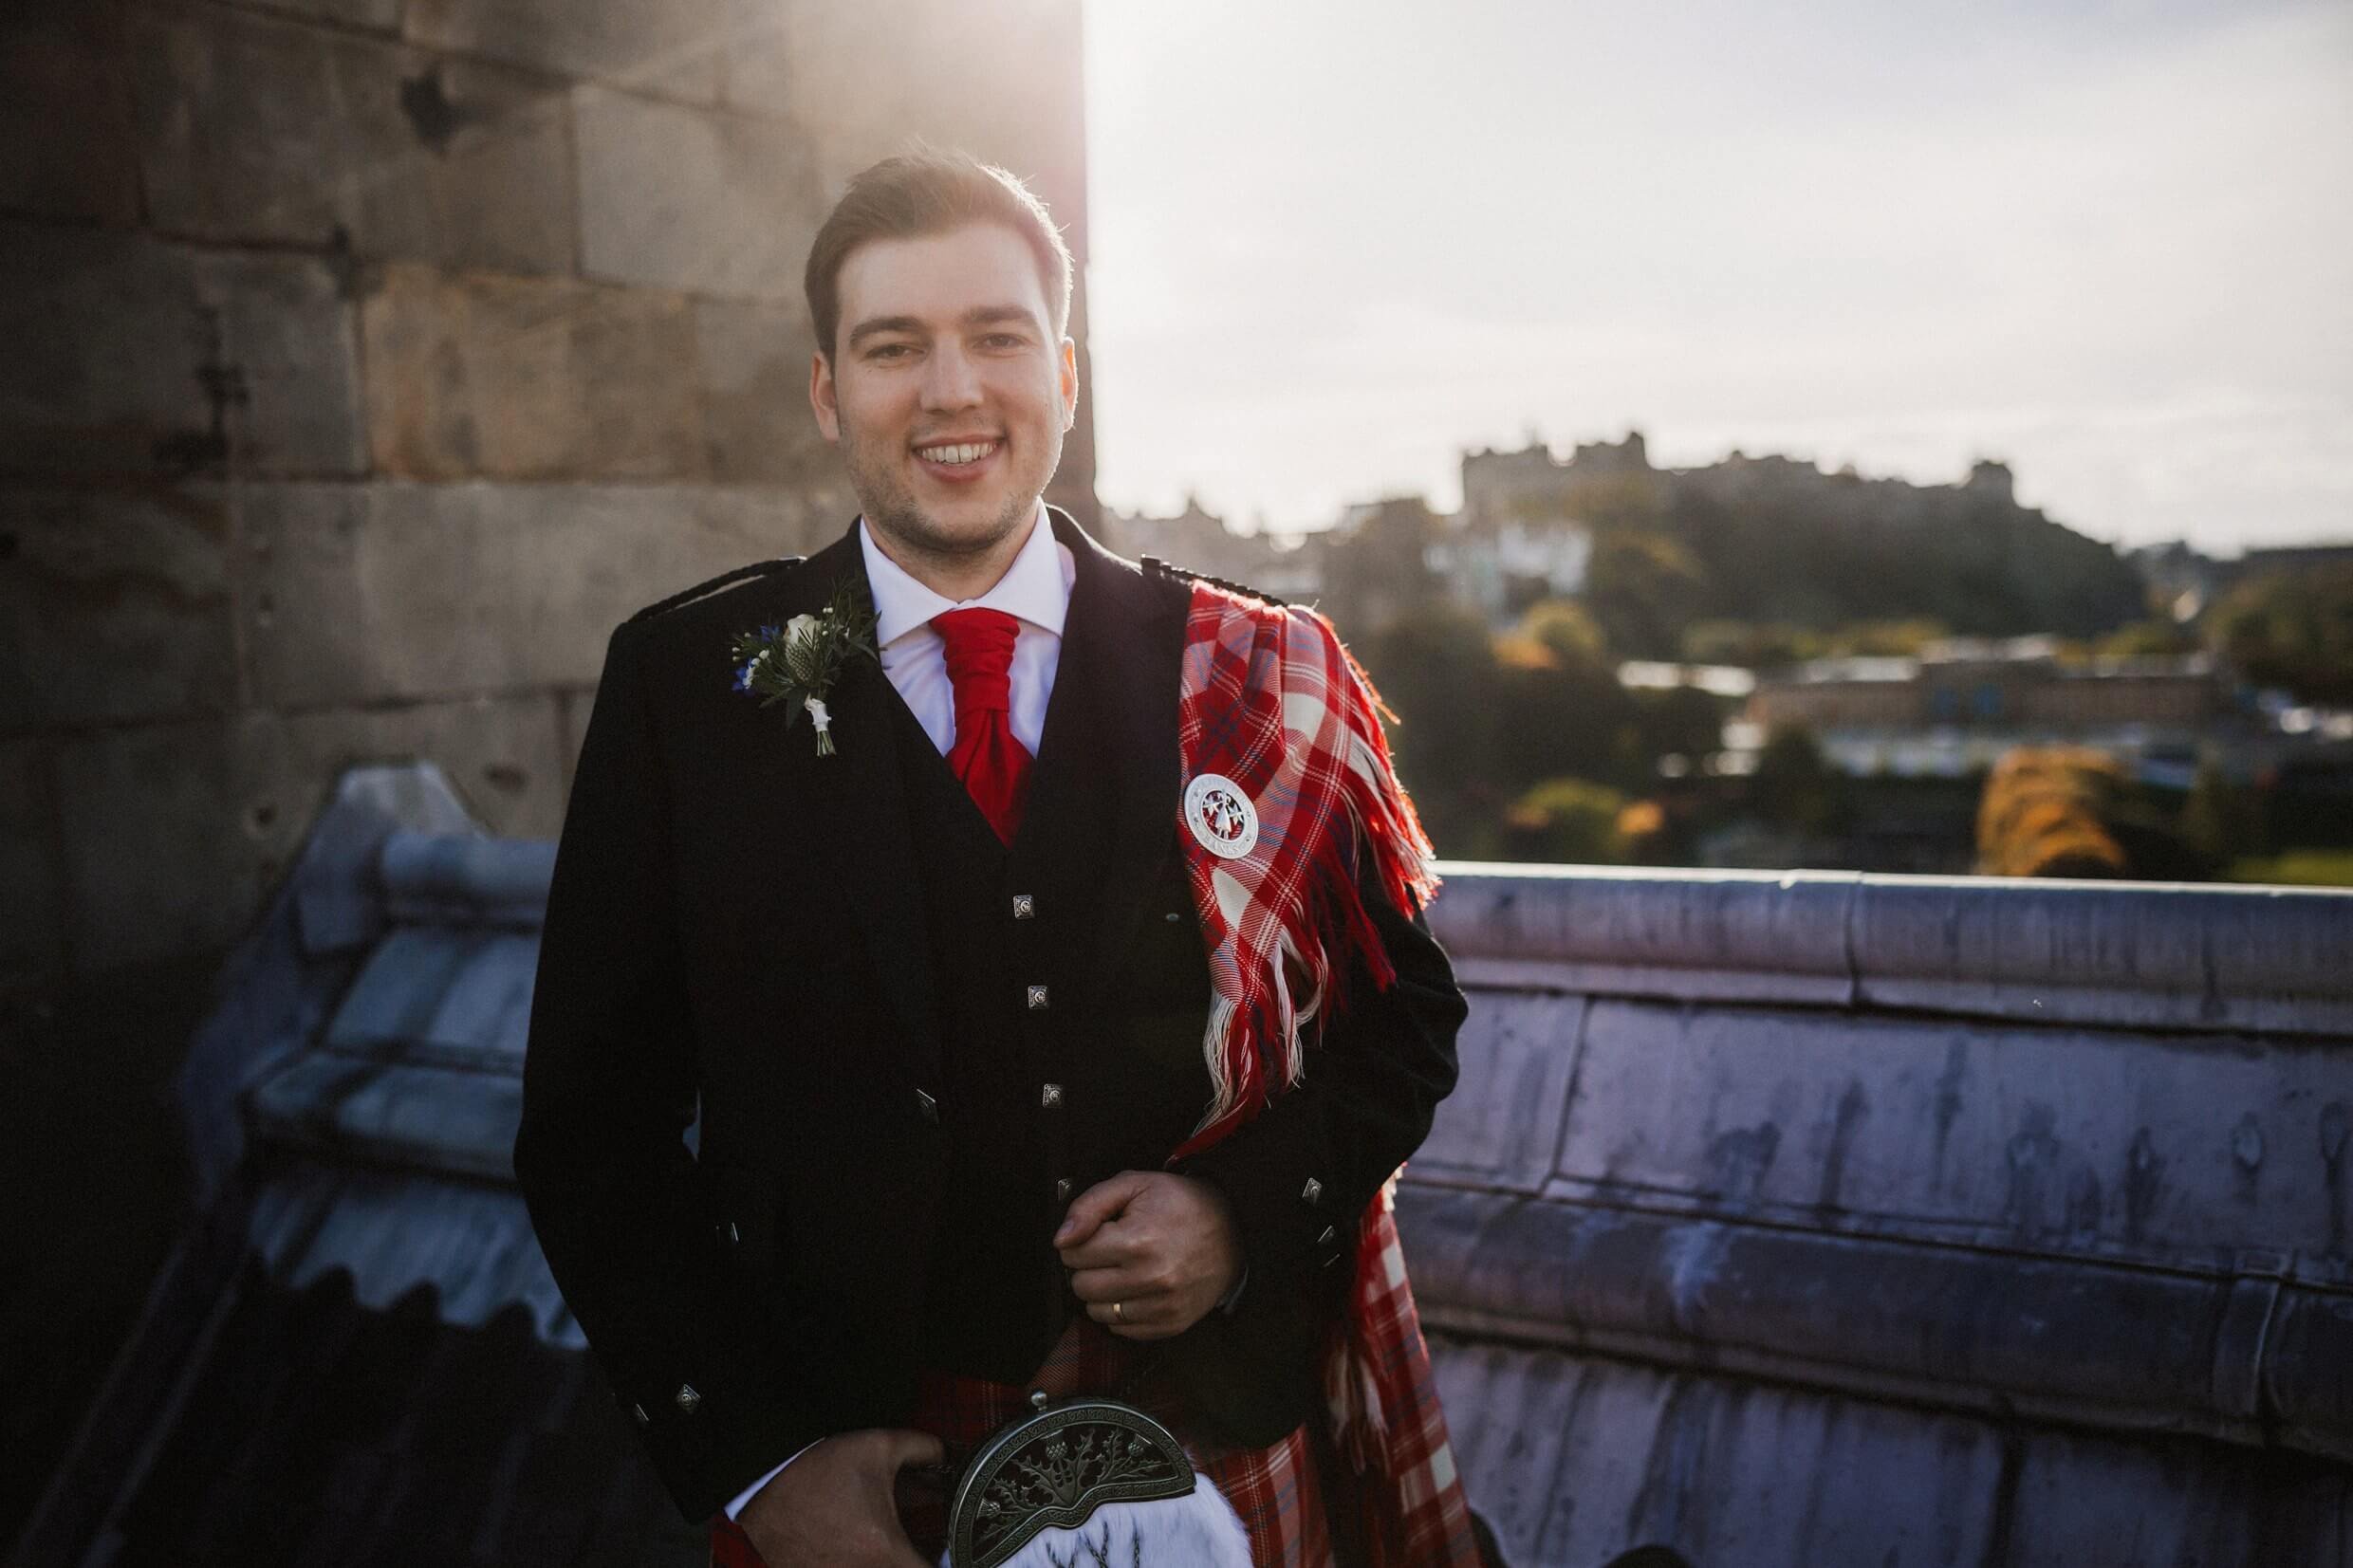 the groom poses for photos on the rooftop of the balmoral hotel edinburgh wedding venue with edinburgh castle visible in the background